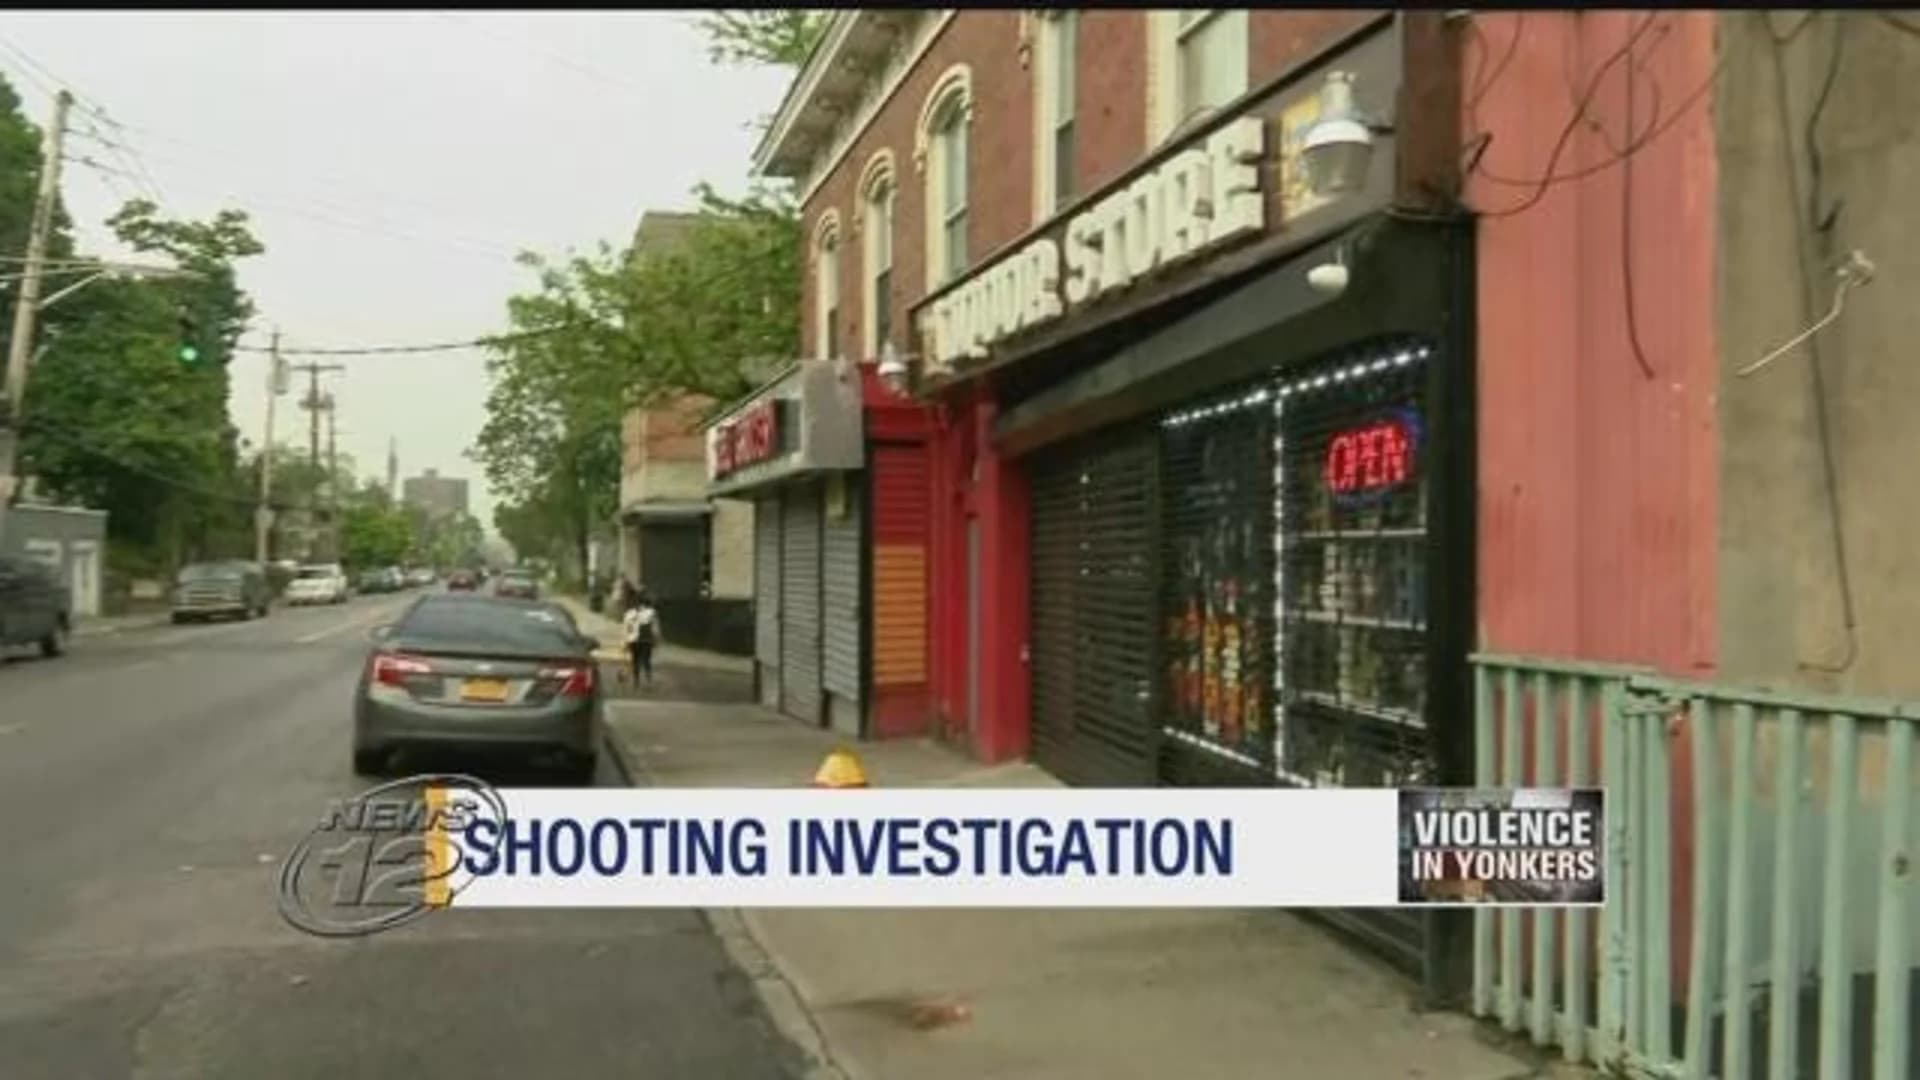 Gunman on the loose after Yonkers shooting